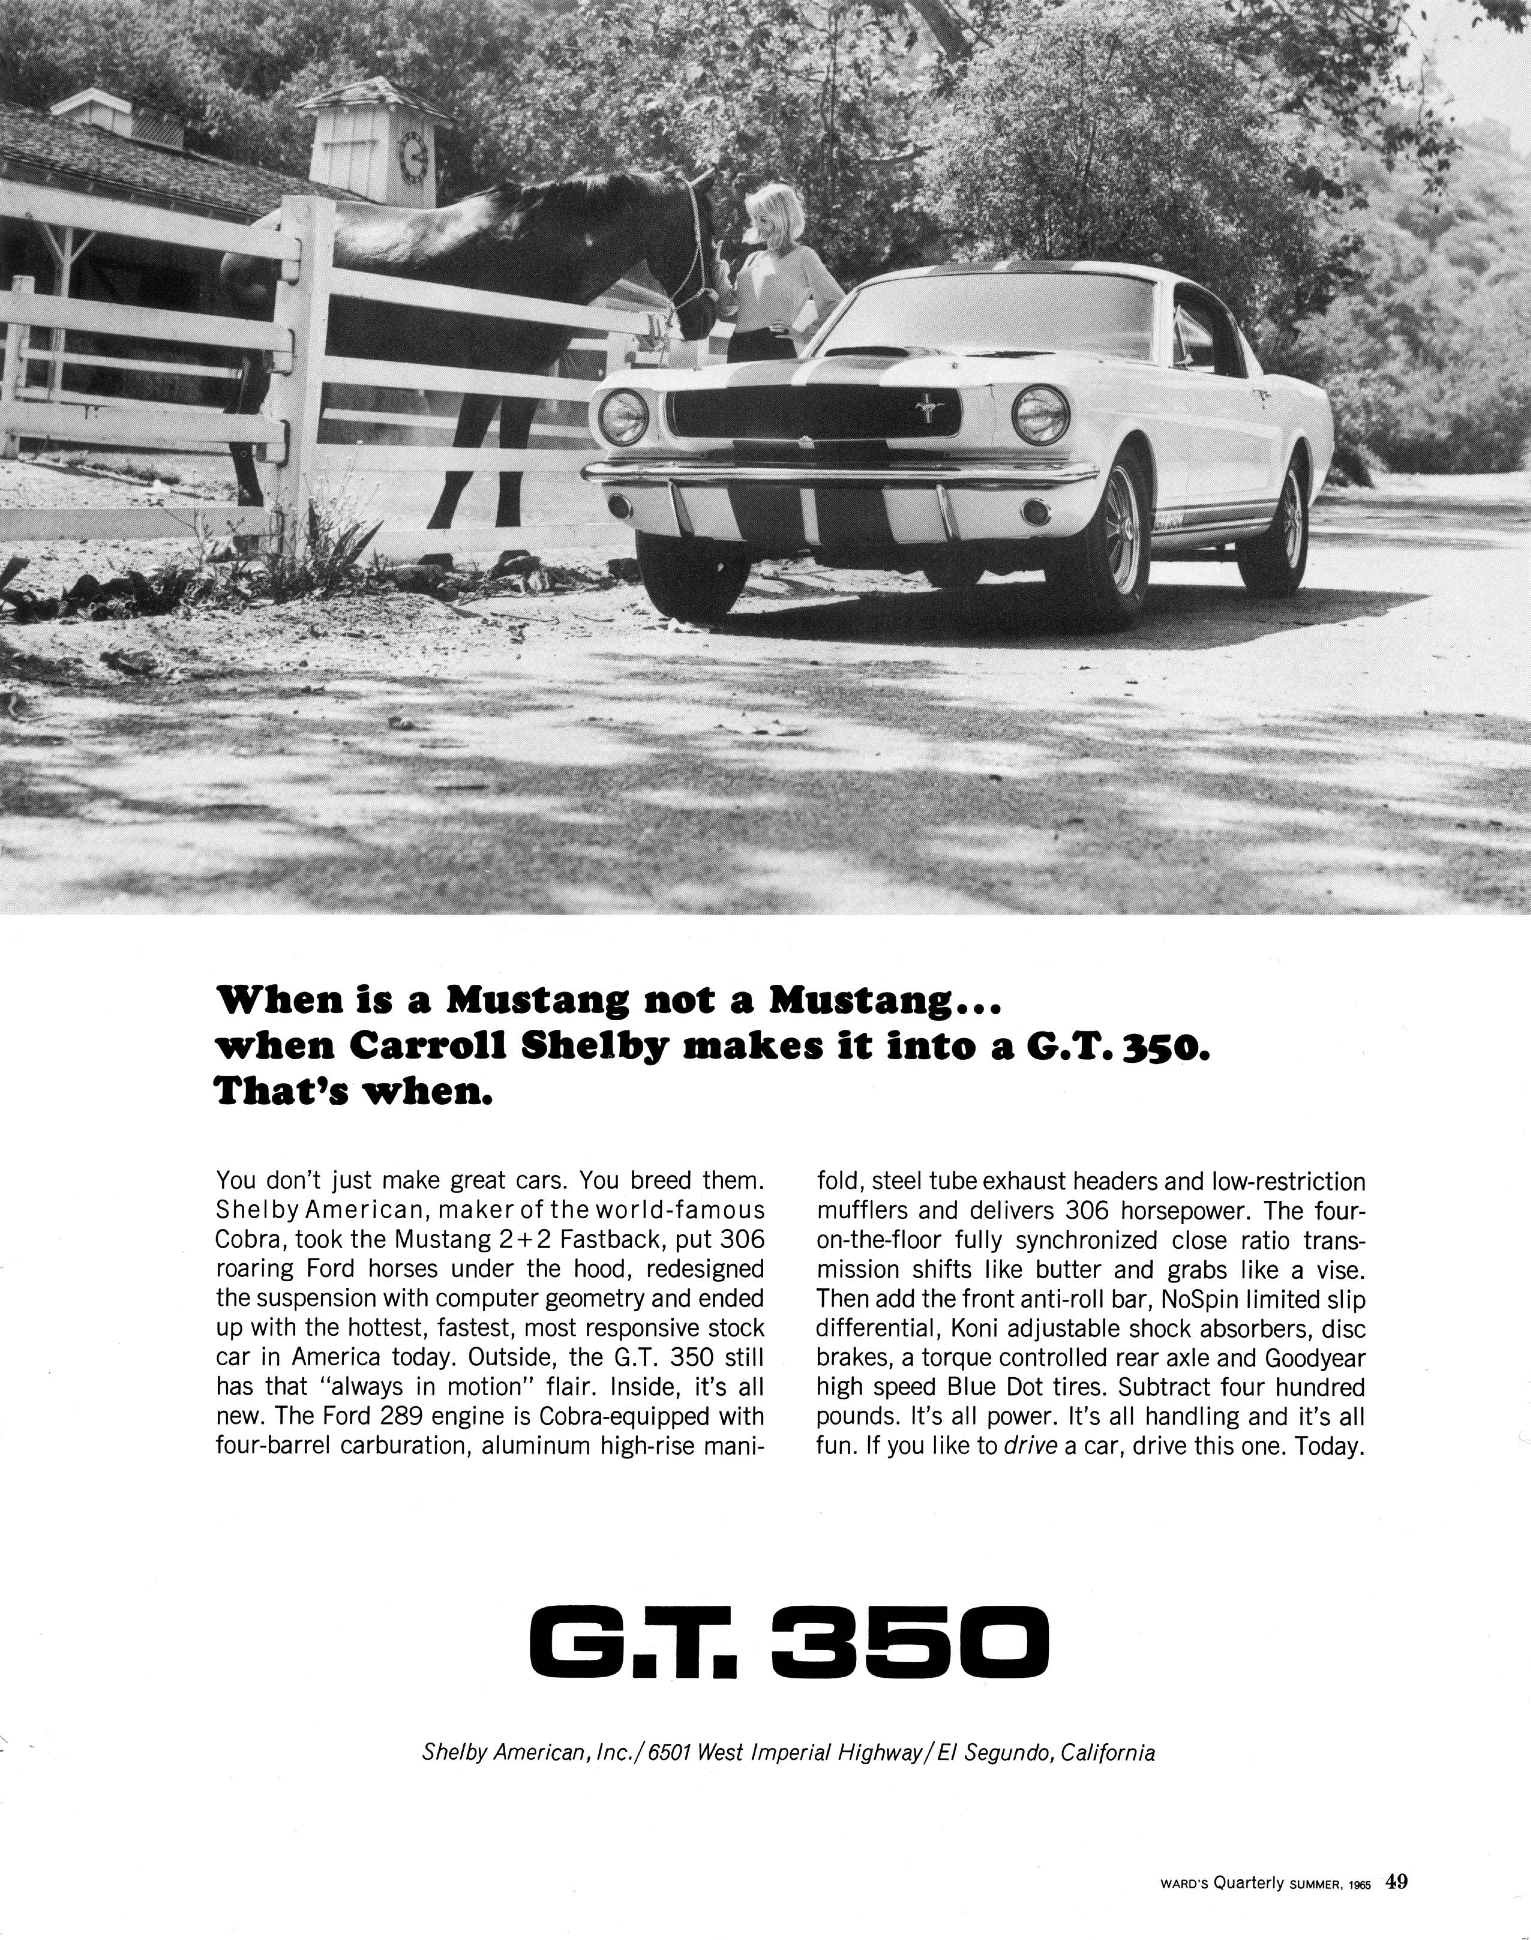 1965 Shelby Ad GT350 "When is a Mustang not a Mustang..."